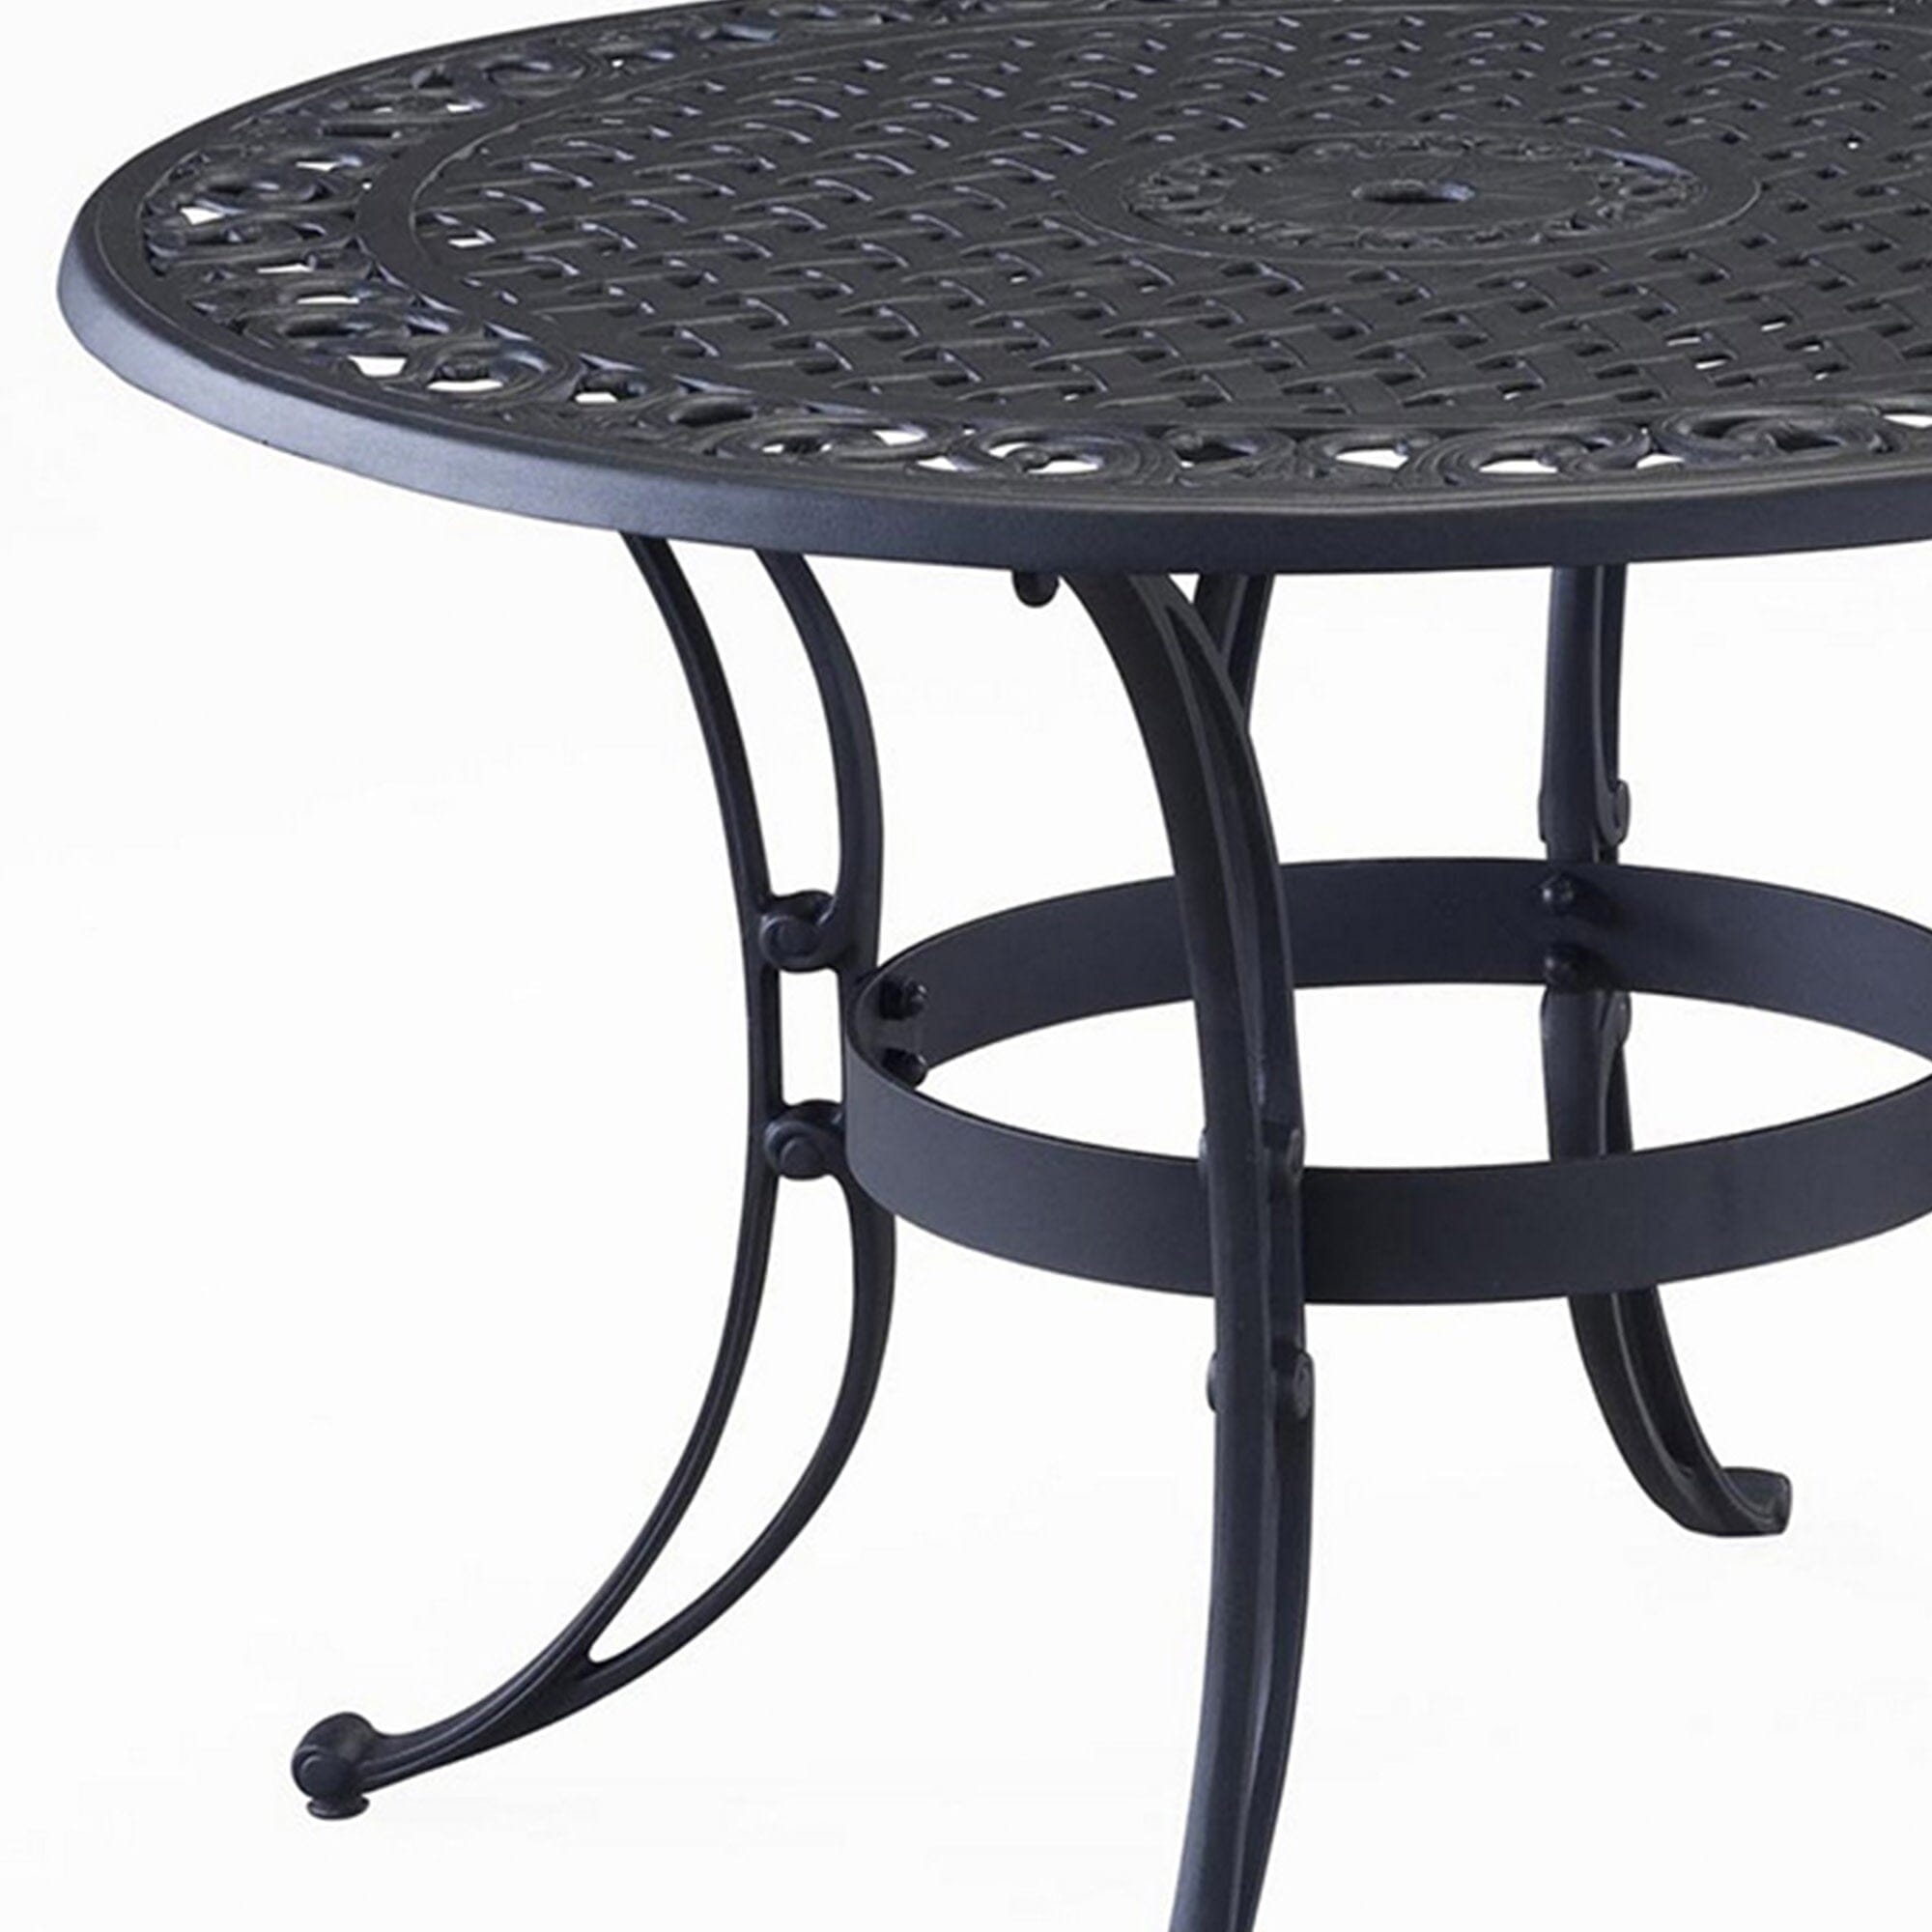 Traditional Outdoor Dining Table By Sanibel Outdoor Dining Sanibel